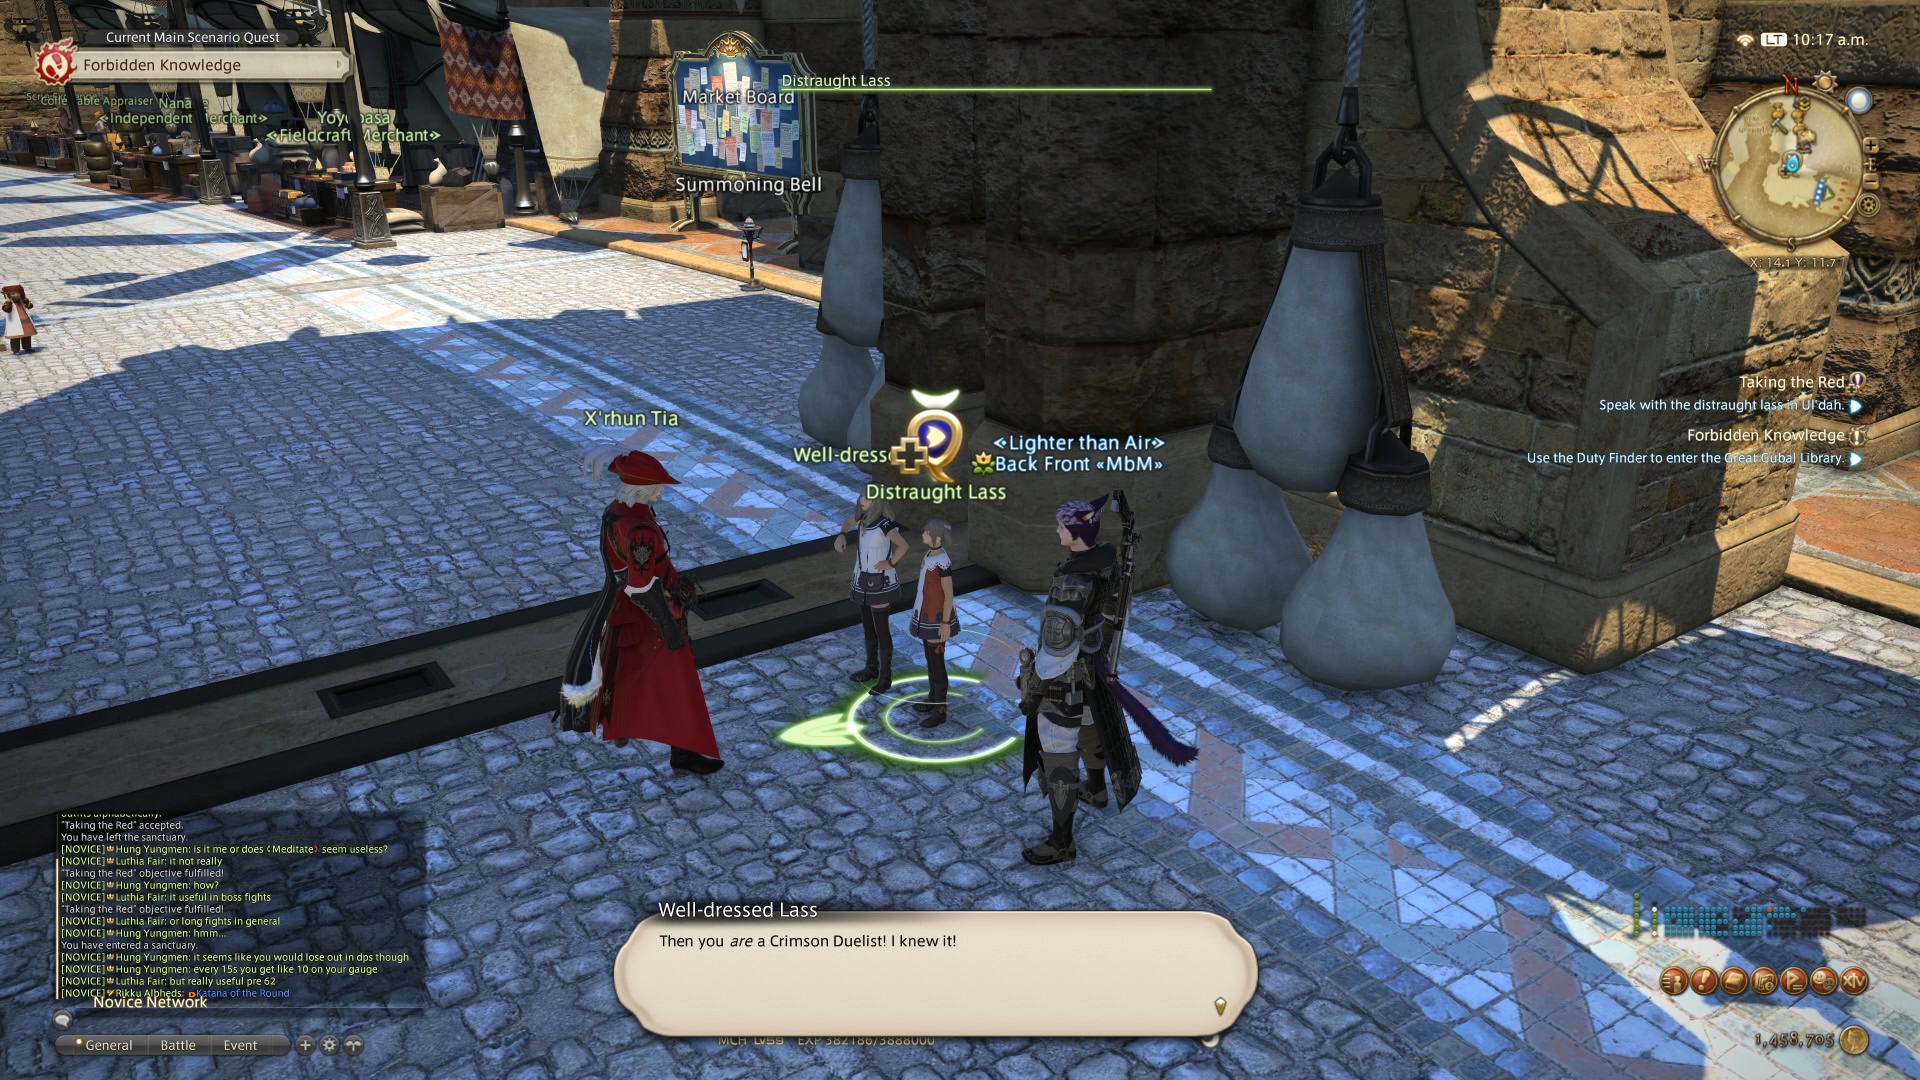 How To Unlock Red Mage And Samurai Jobs In Final Fantasy 14